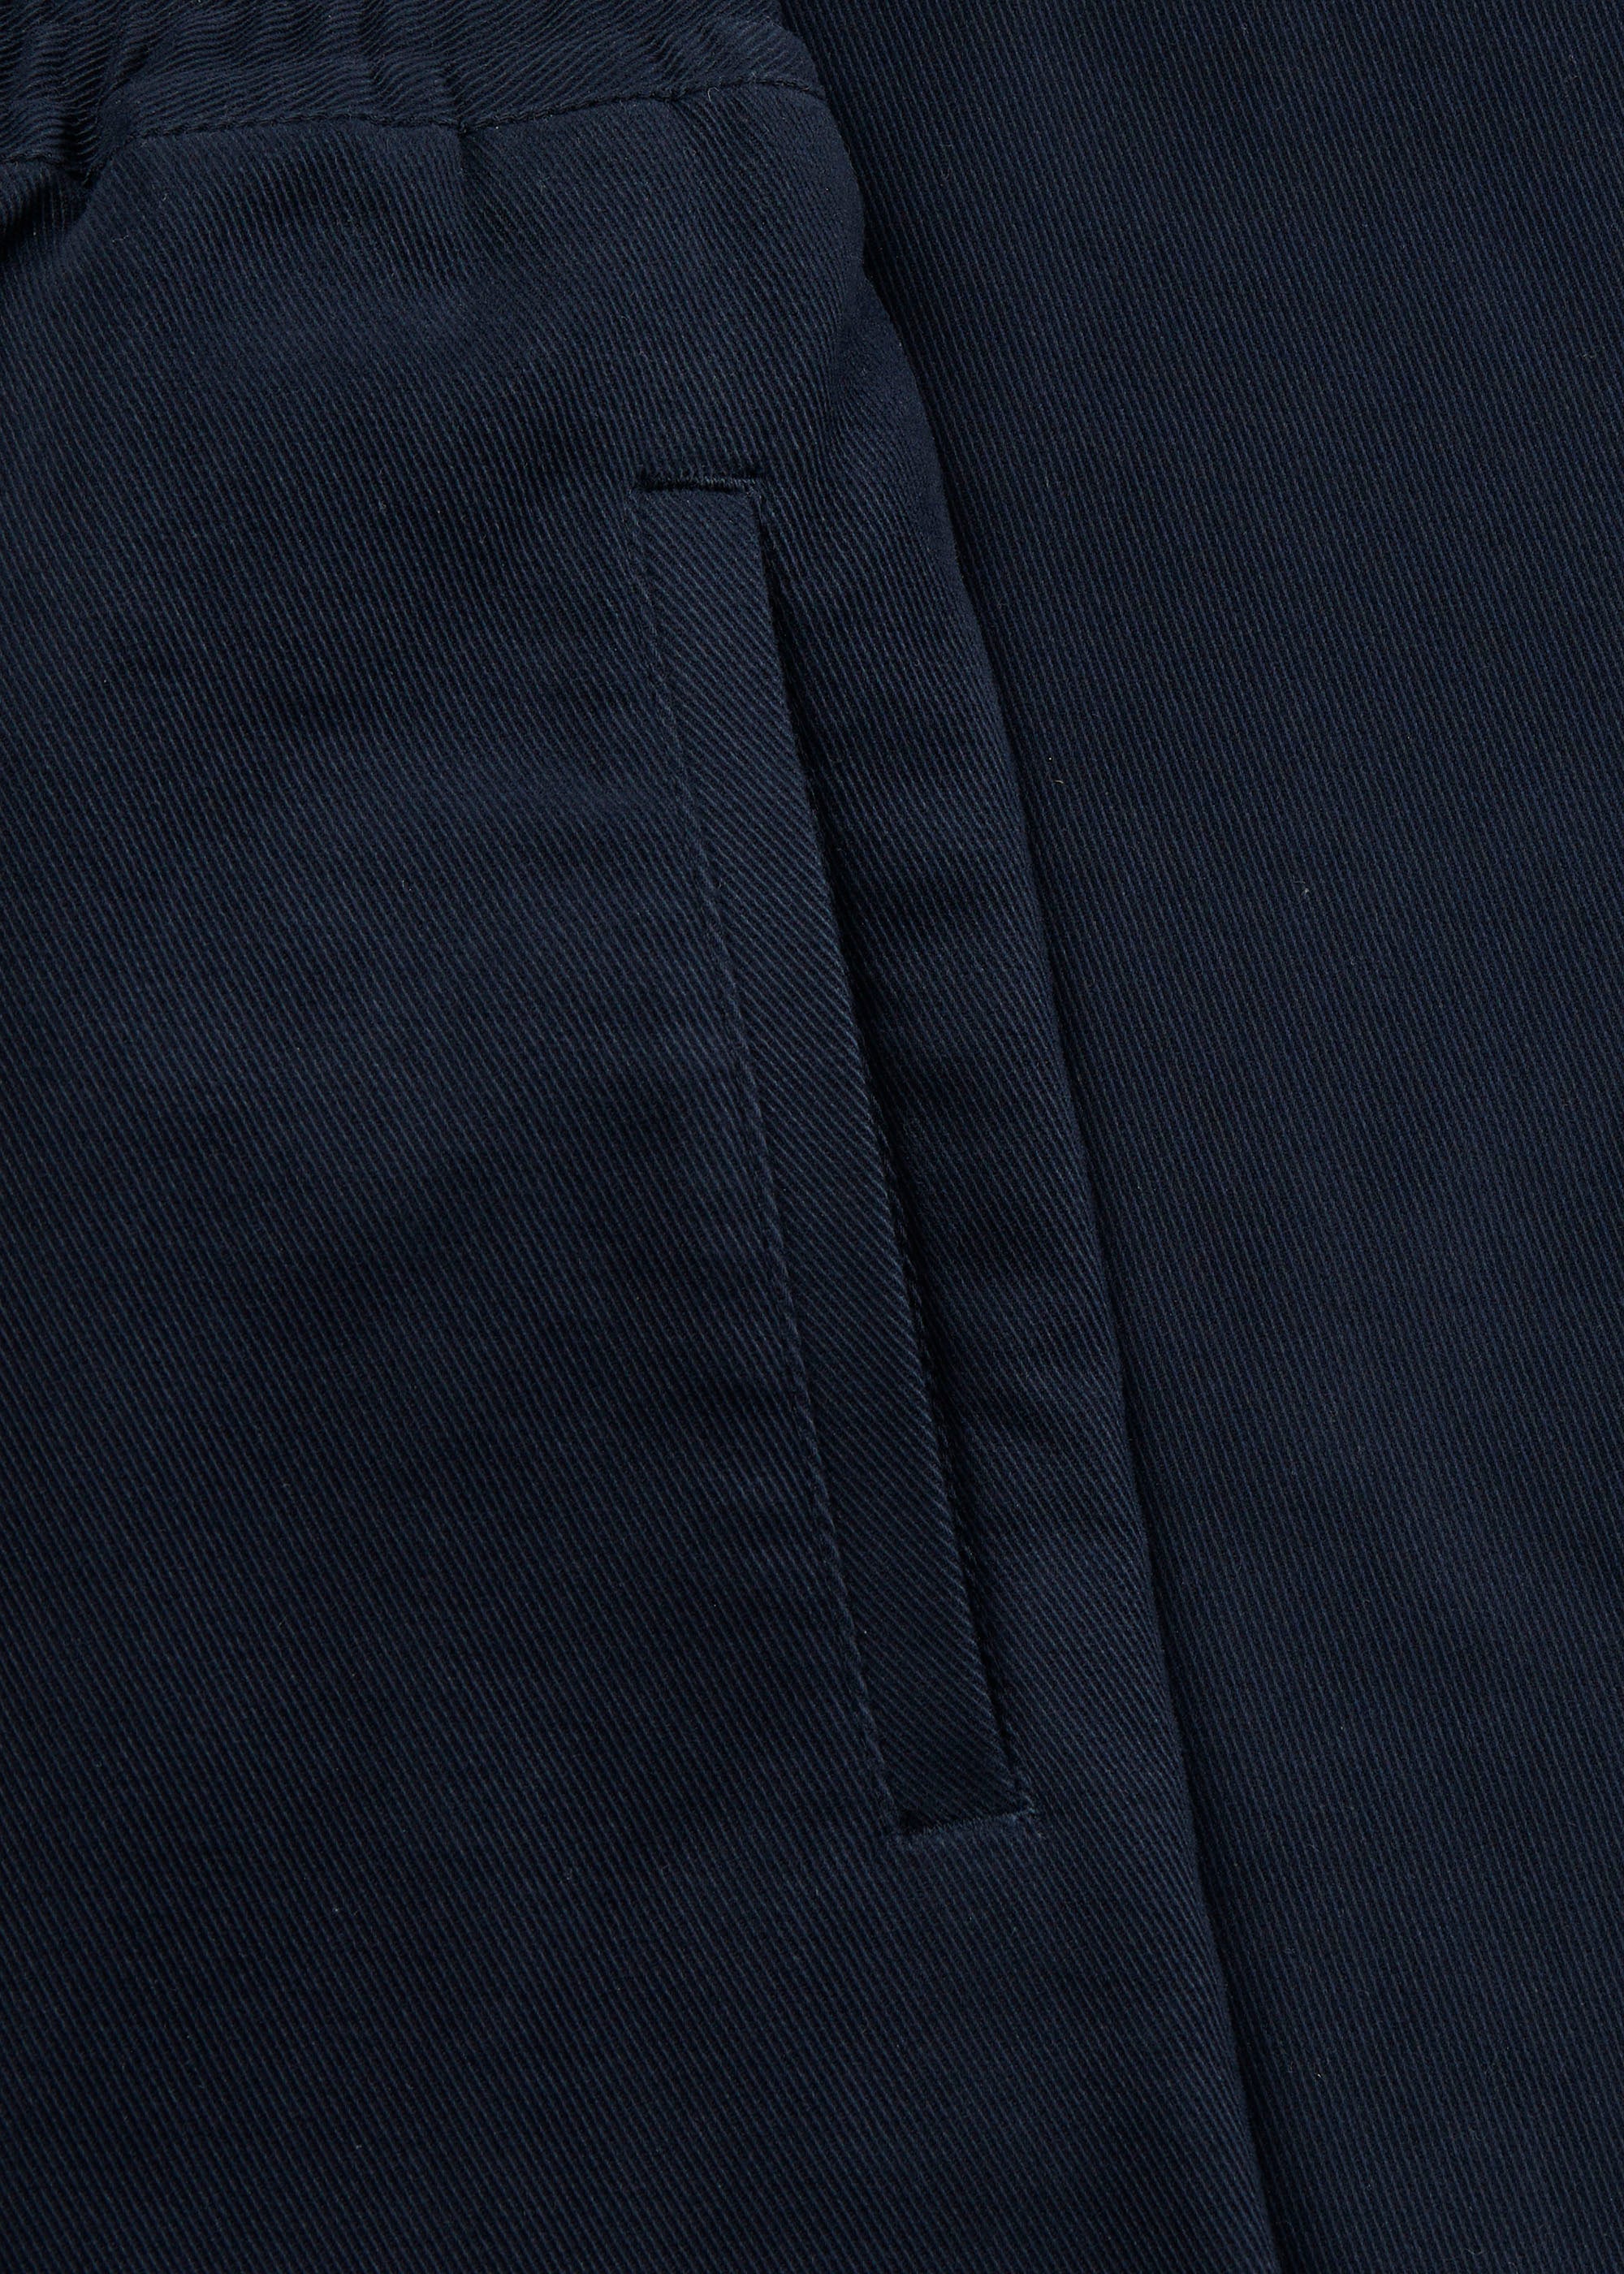 Coco pant tailored | Navy